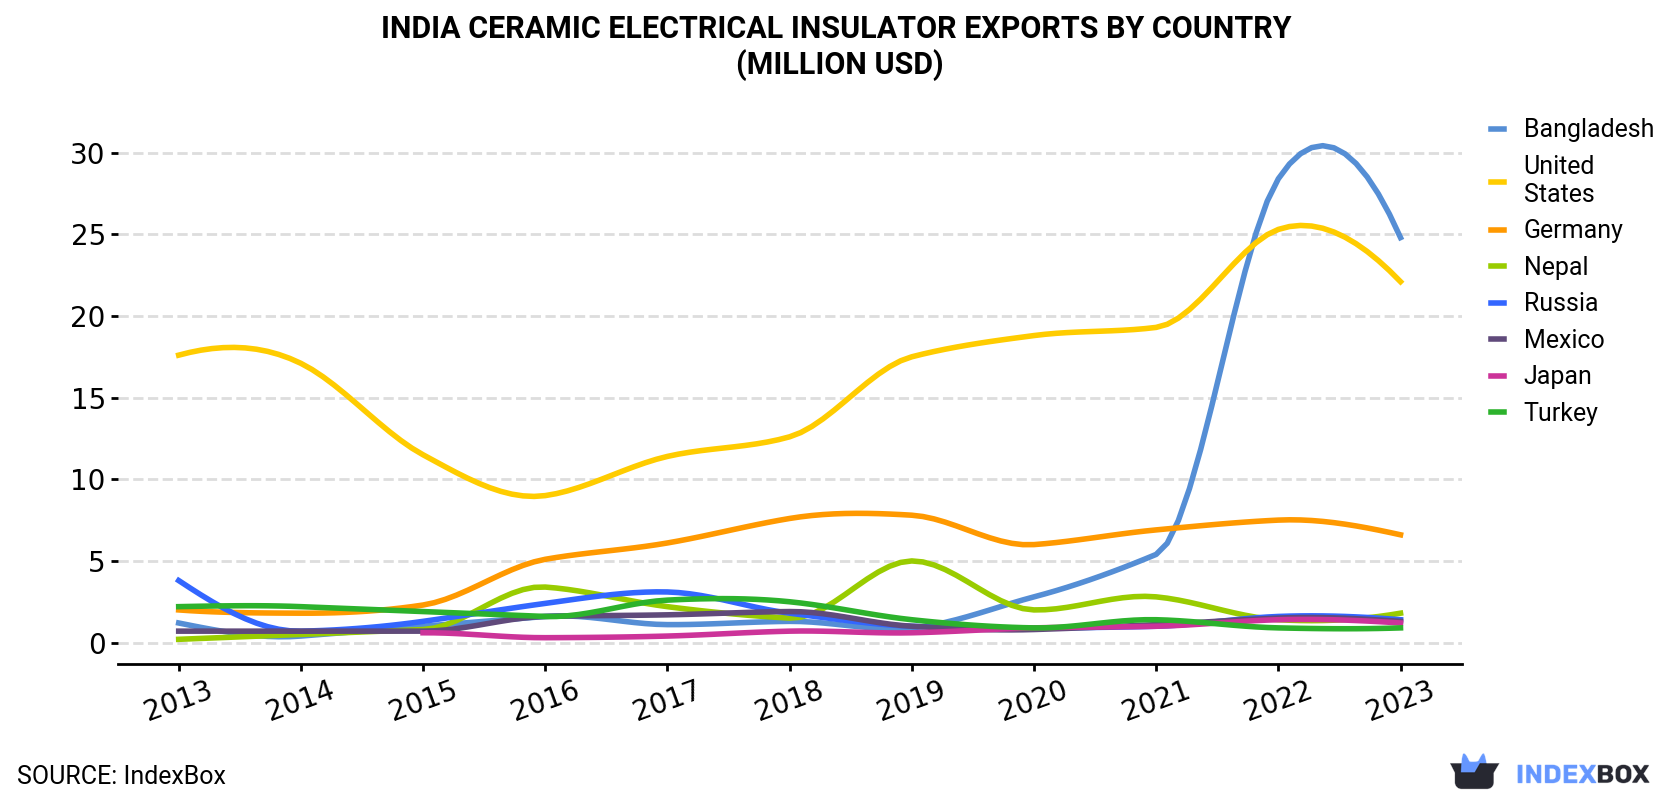 India Ceramic Electrical Insulator Exports By Country (Million USD)